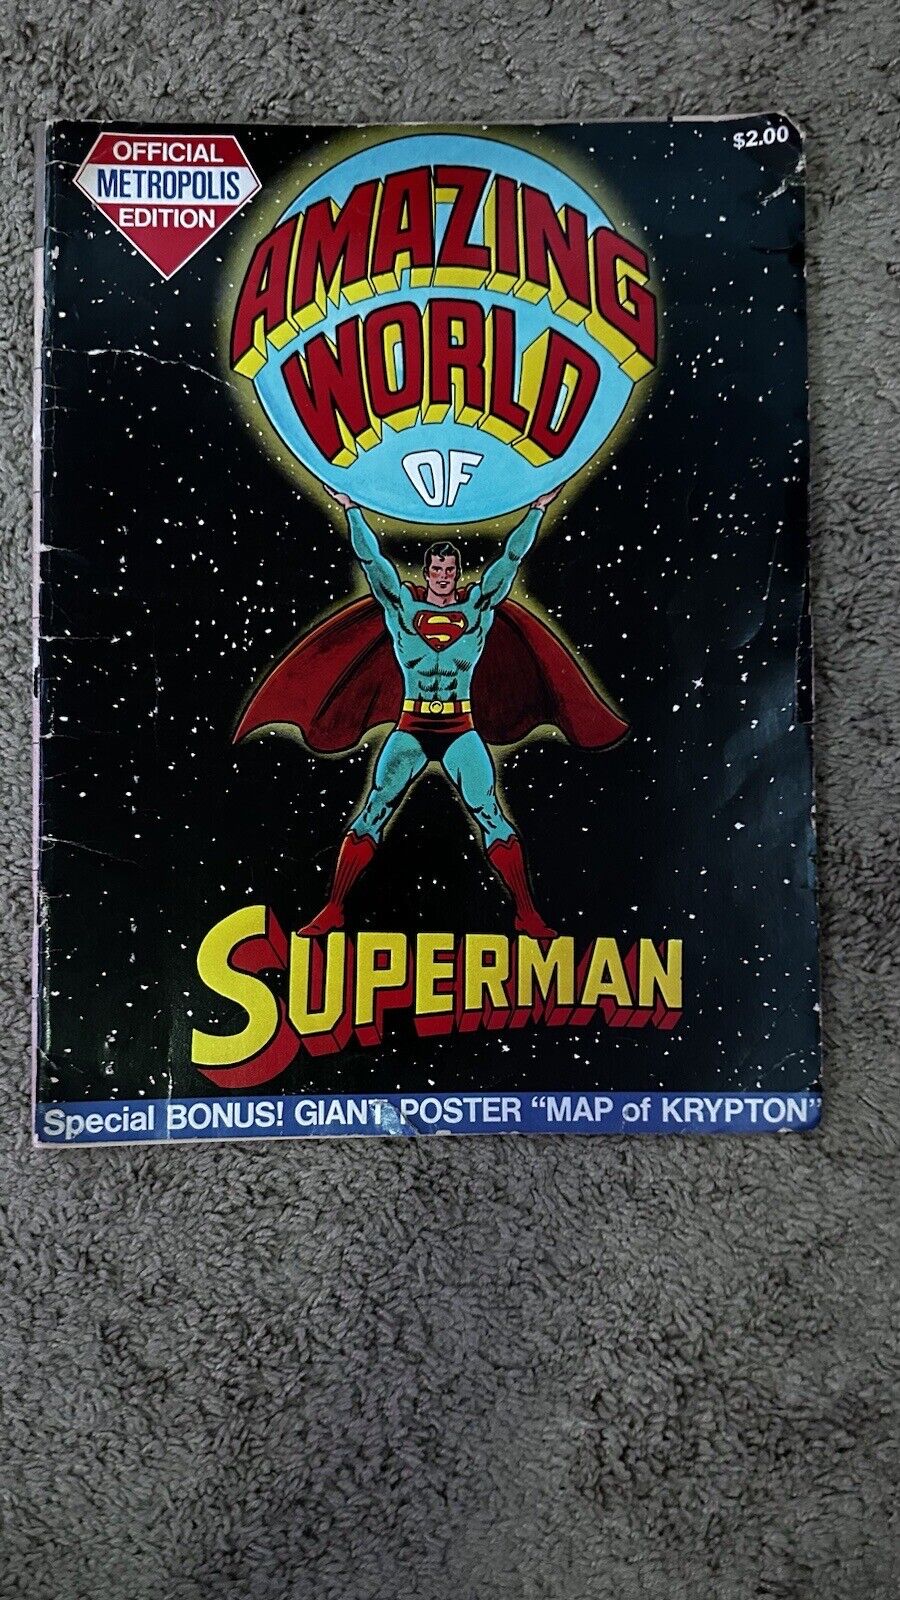 Amazing World of Superman Official Metropolis Edition 1973 DC Oversized Comic